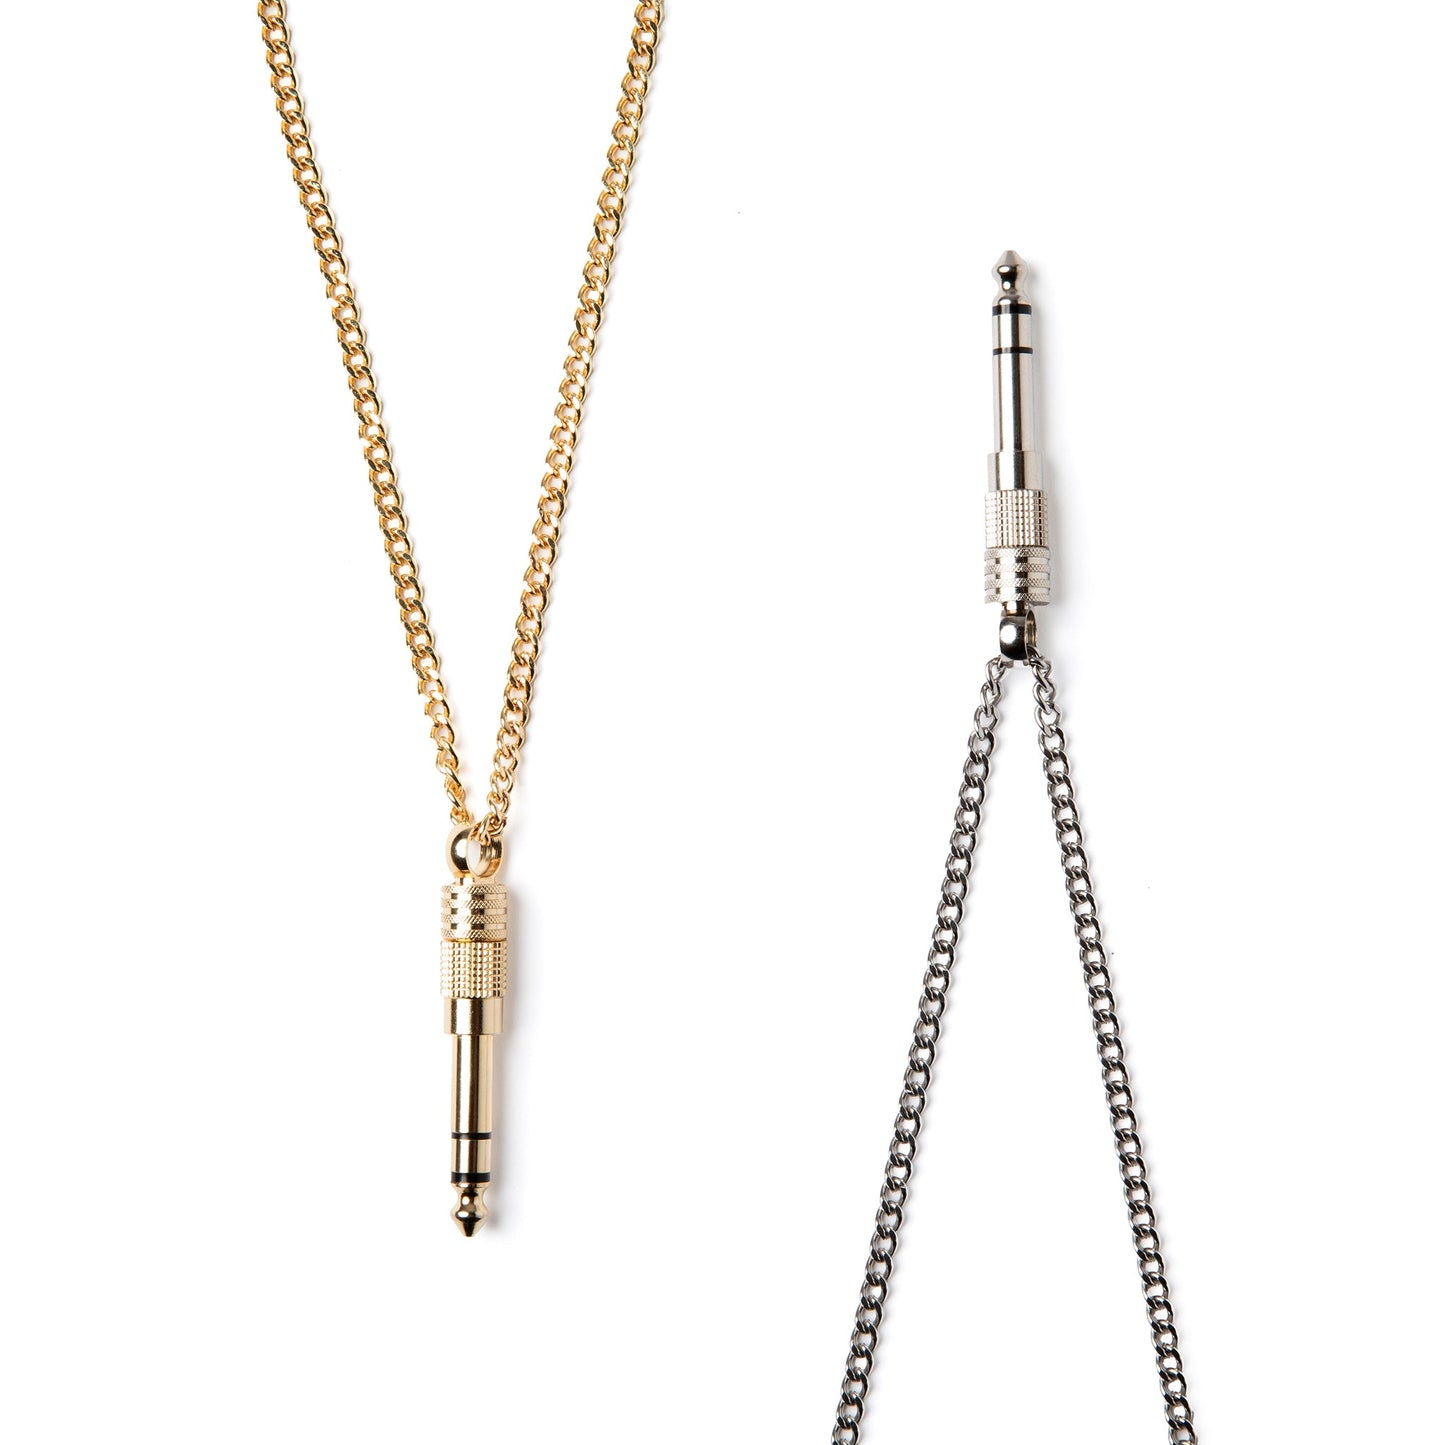 Gold & Silver DJ Necklace with 1/4" Adapter Bundle